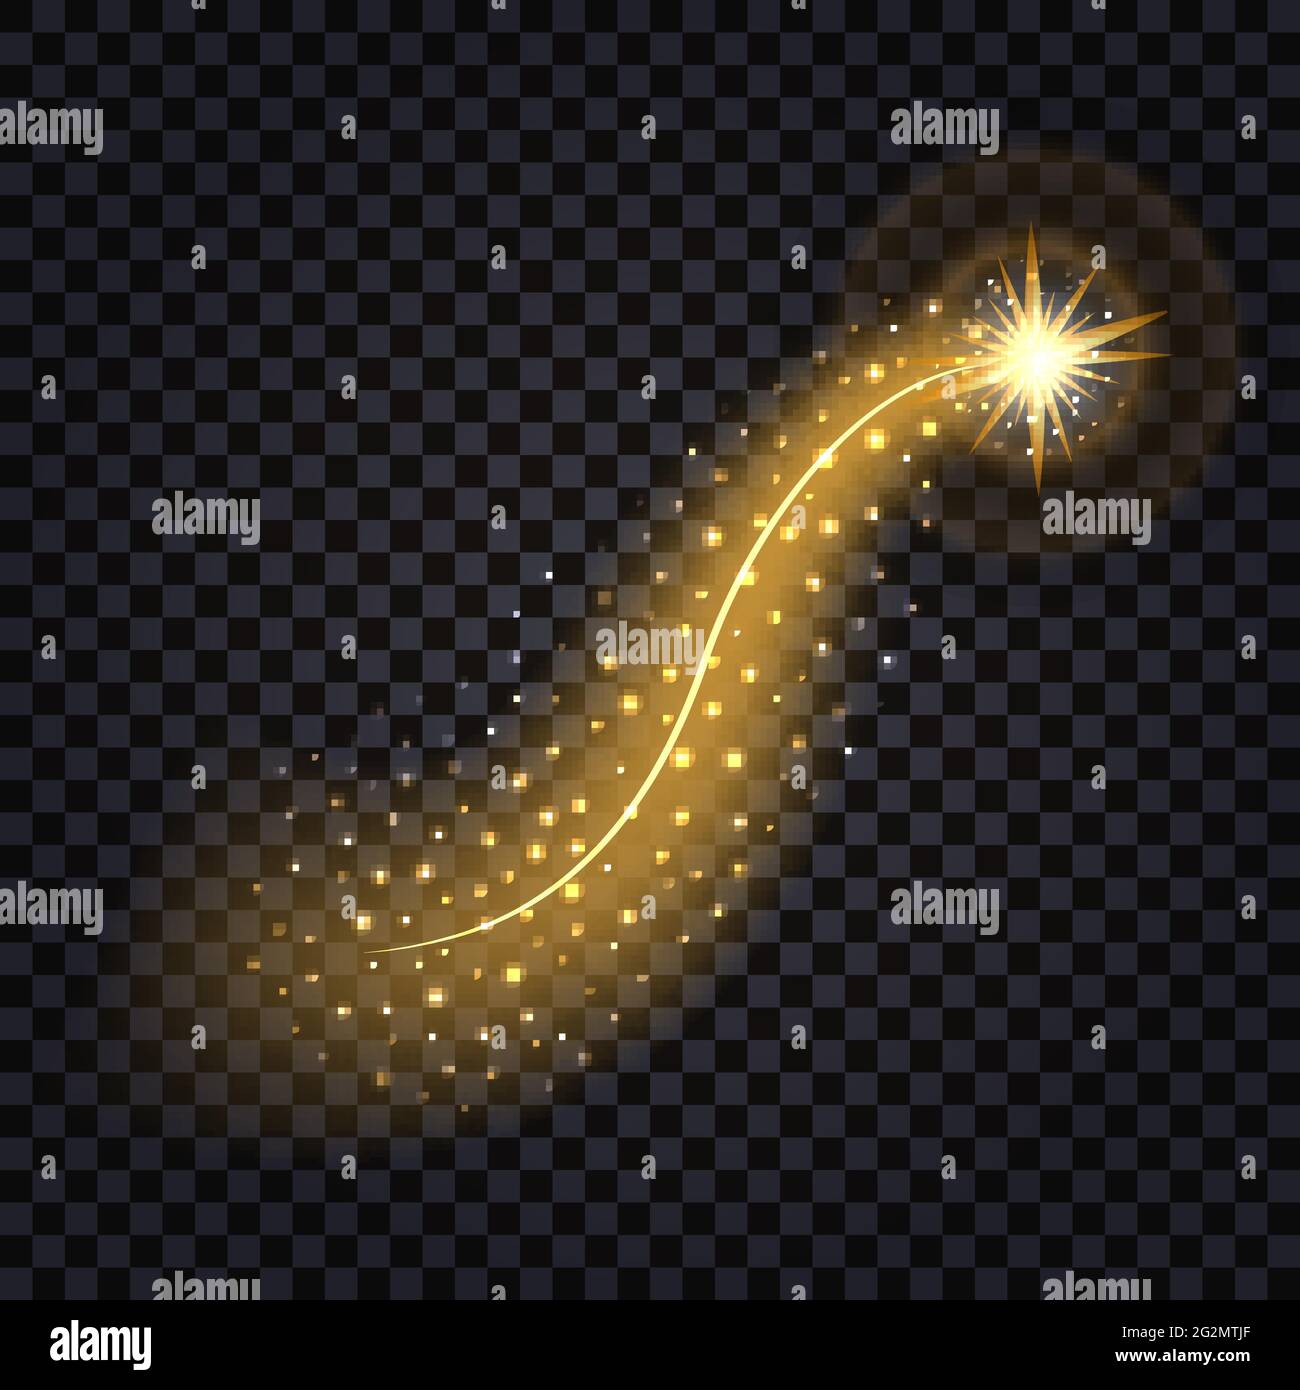 Gold glitter flare spray texture background. Stock Vector by